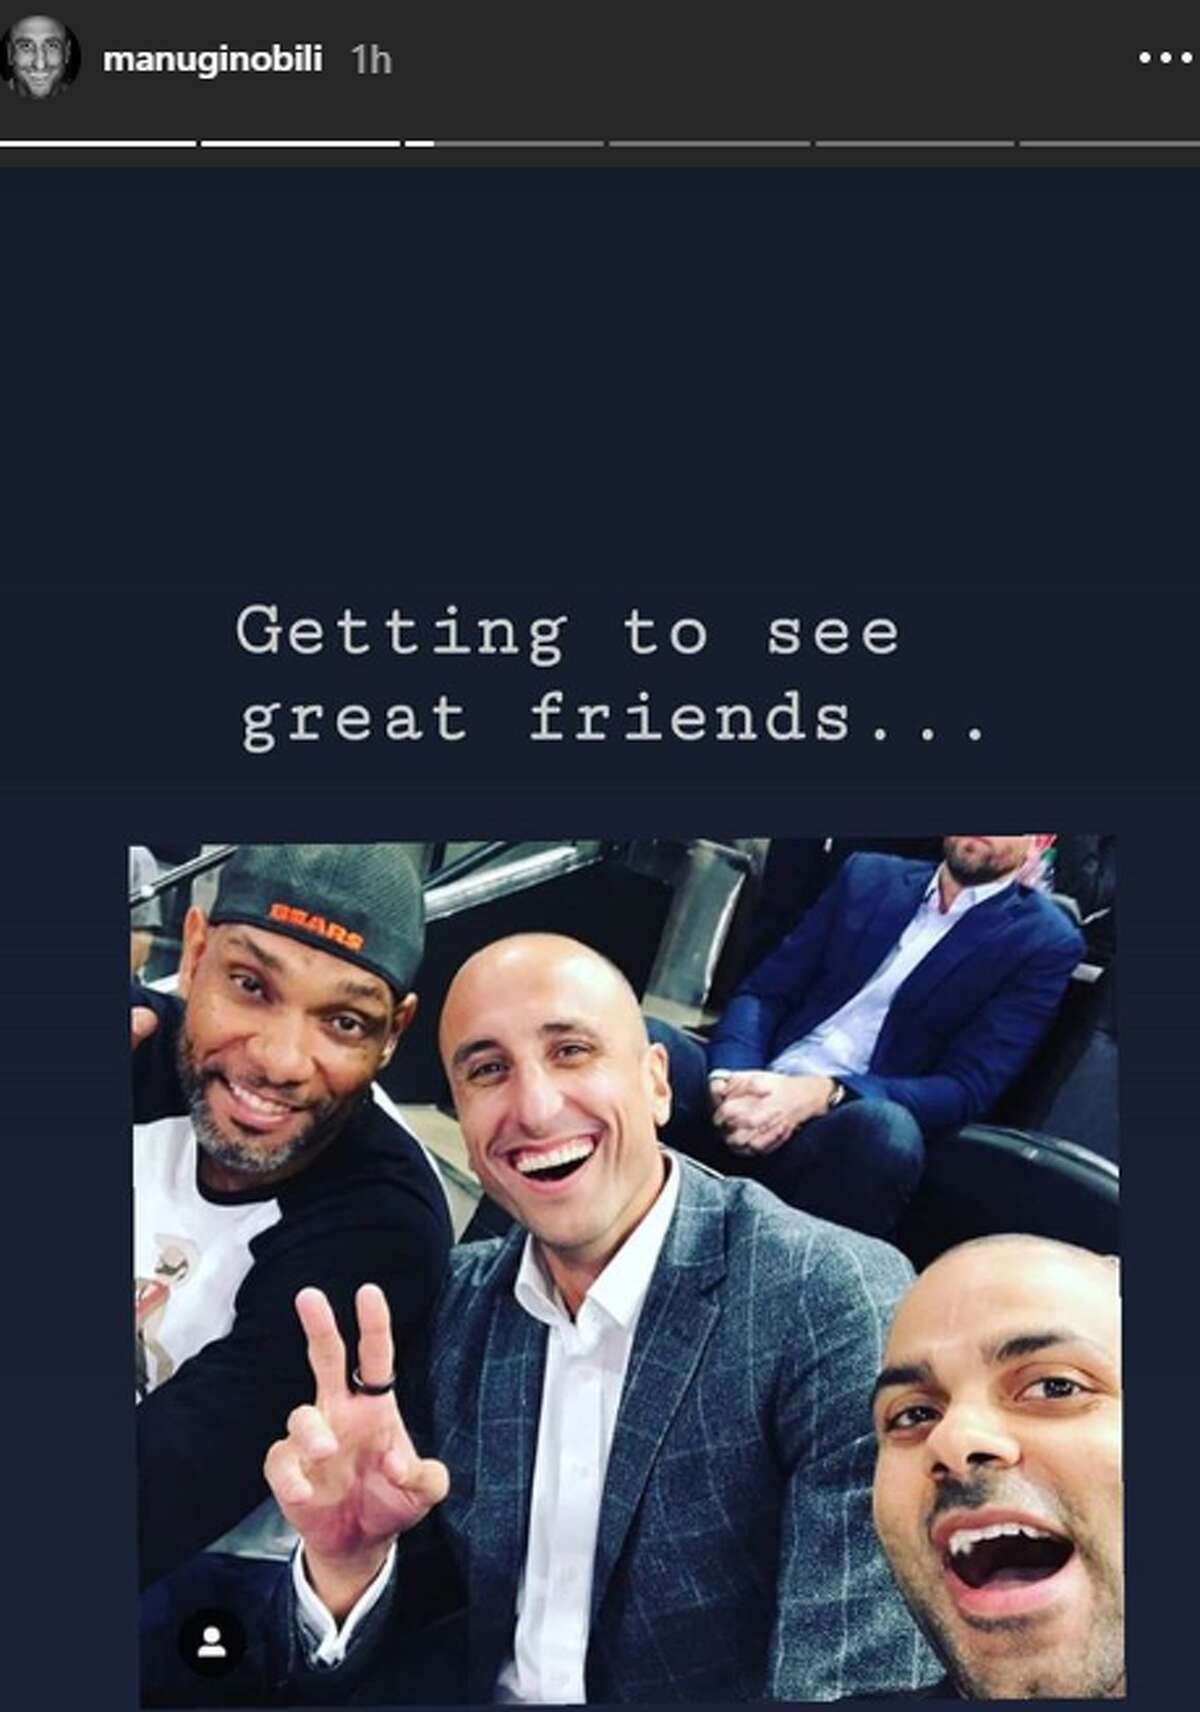 Manu Ginobili summed up his highlights of the night via his Instagram story feature.